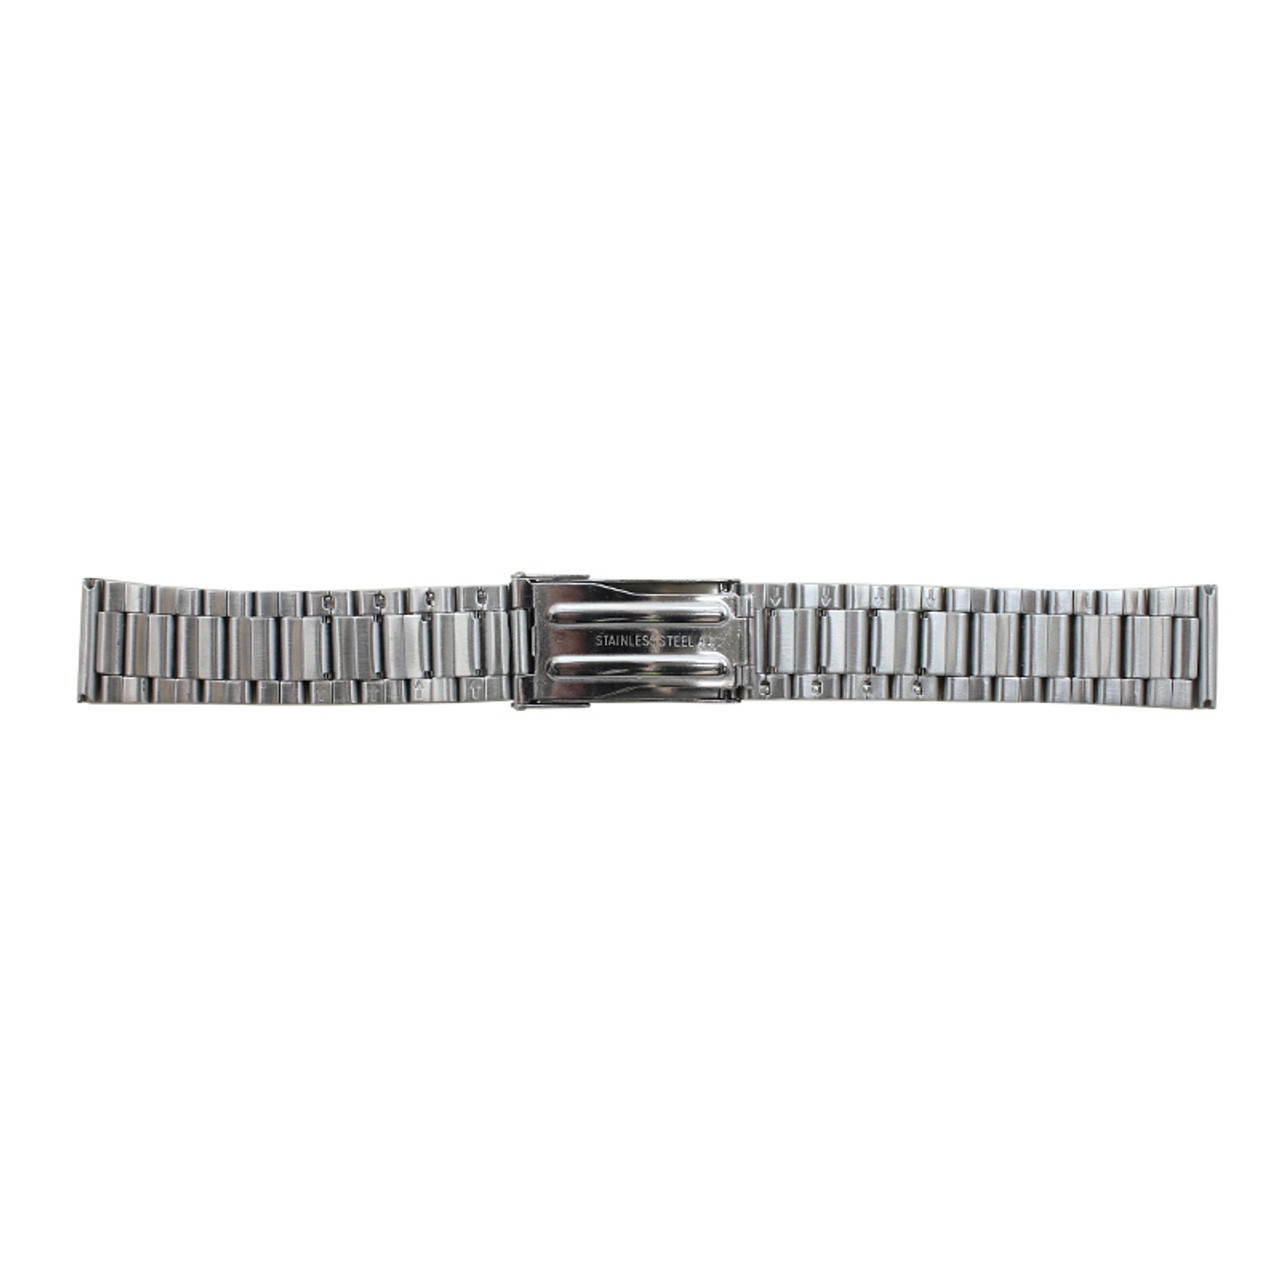 20MM Silver Stainless Steel Watch Band Clasp Bracelet Extender